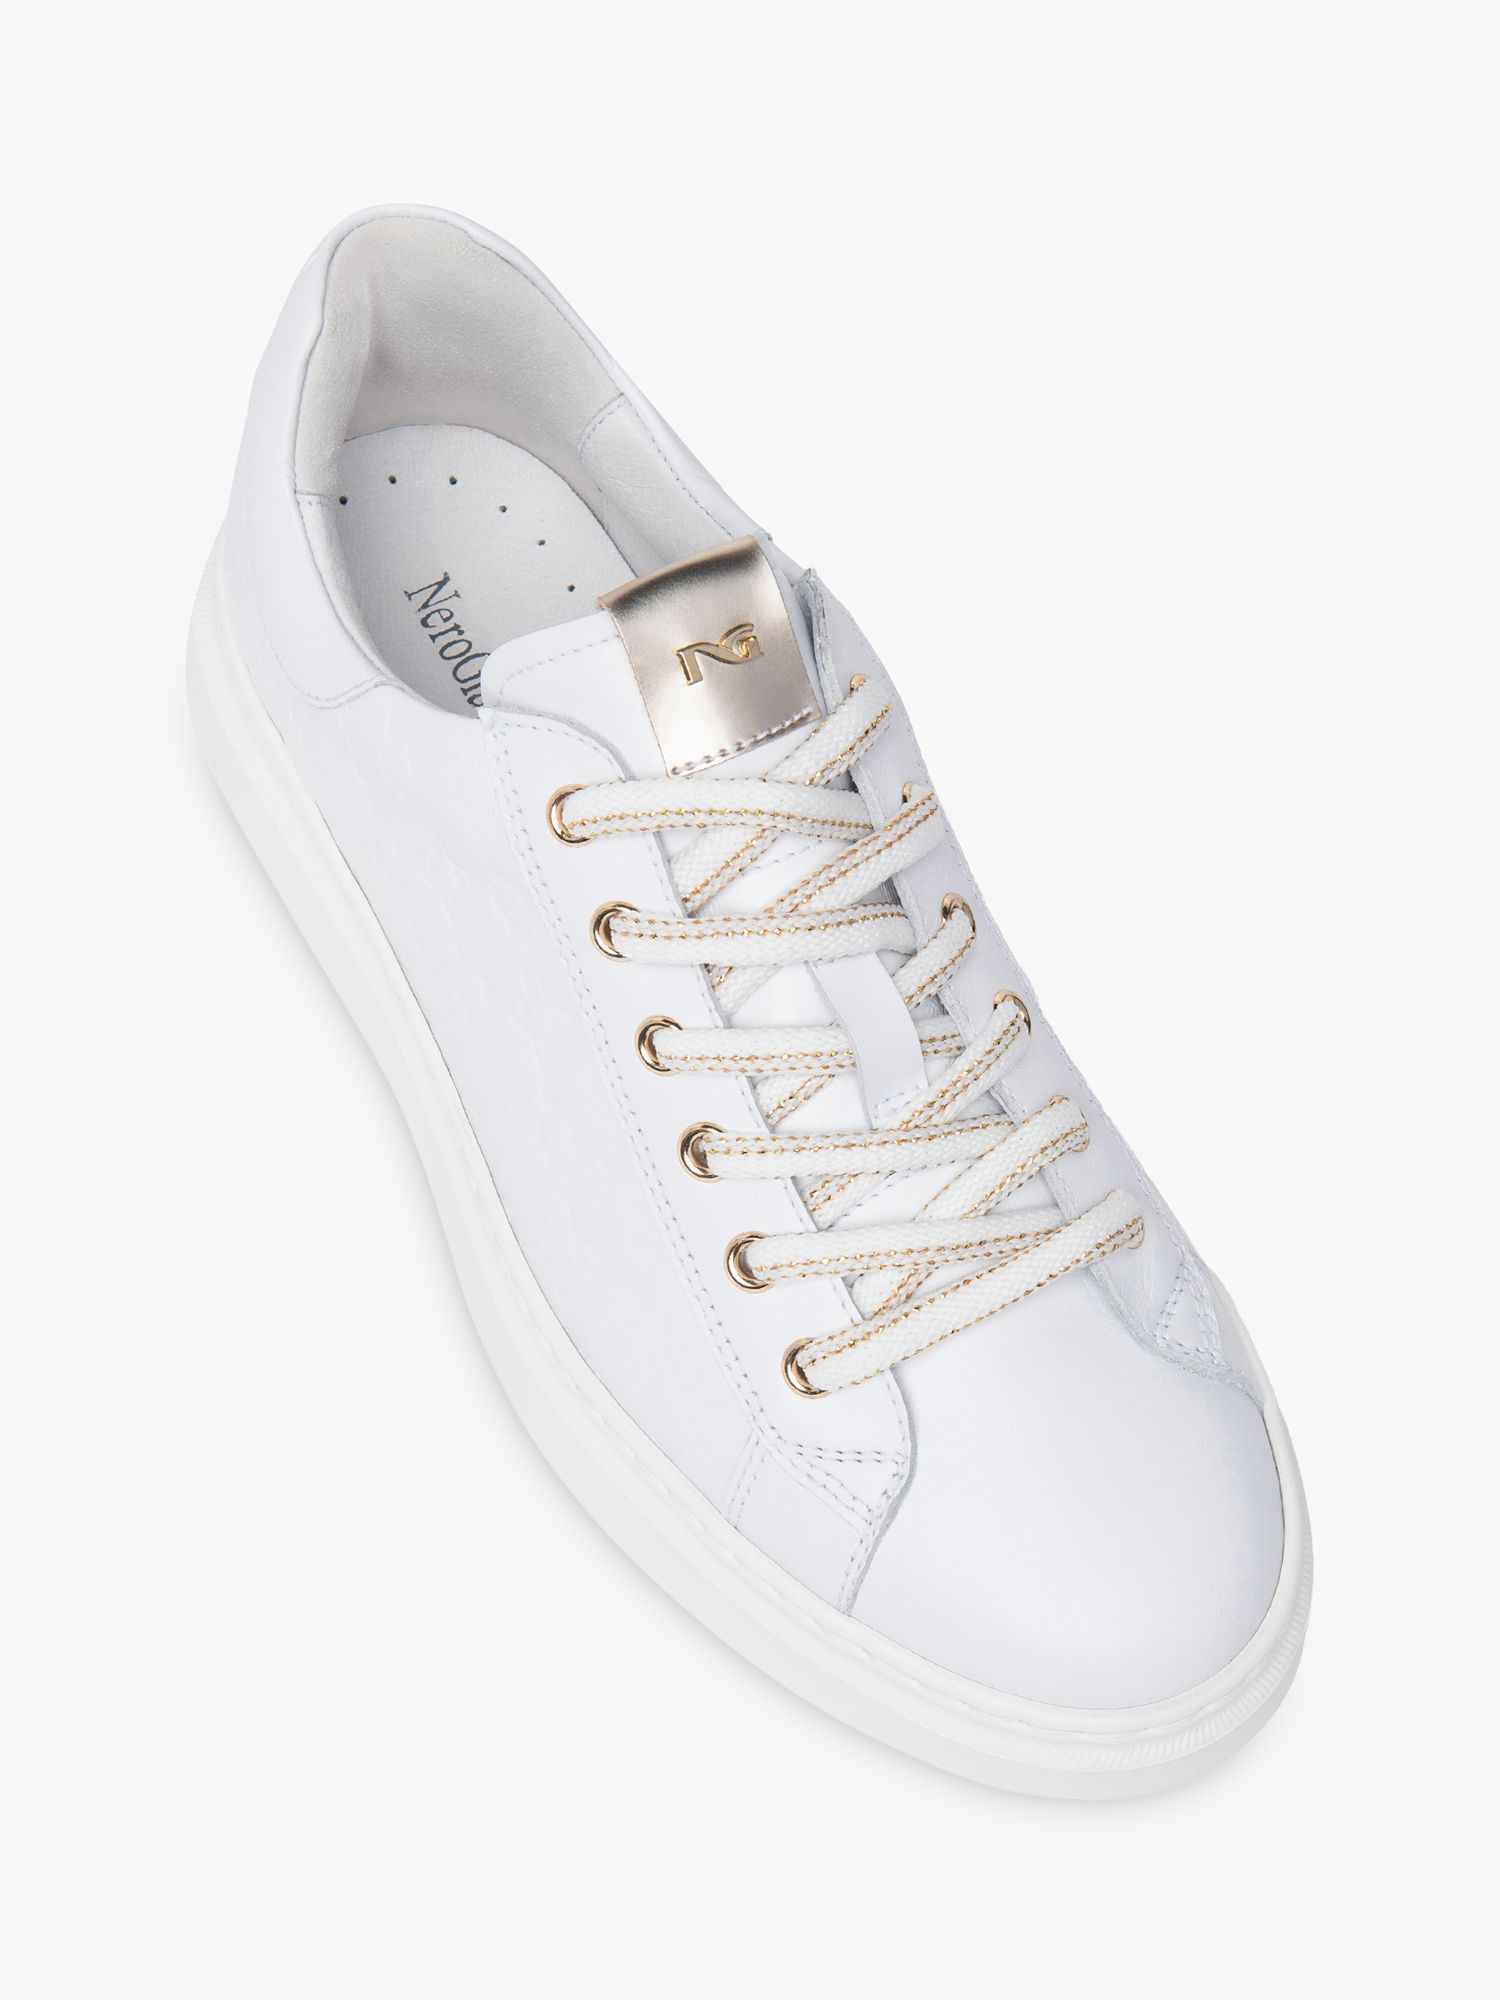 Buy NeroGiardini Leather Lace Up Trainers, White Online at johnlewis.com